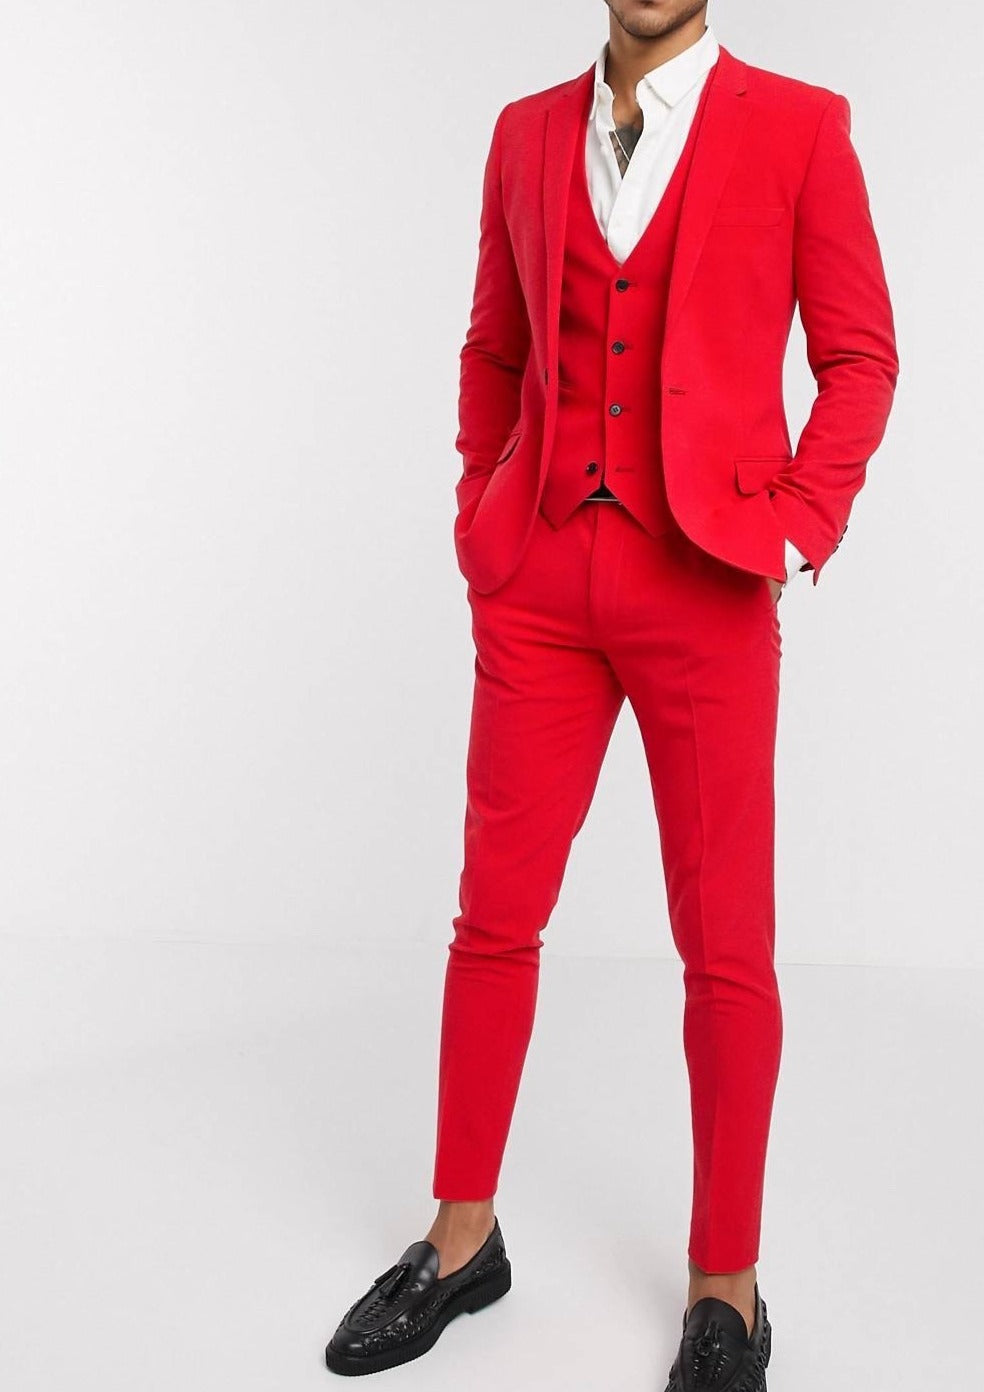 Red - not so dead? Introducing the red suit - Bespoke Suits By Savile Row  Tailors